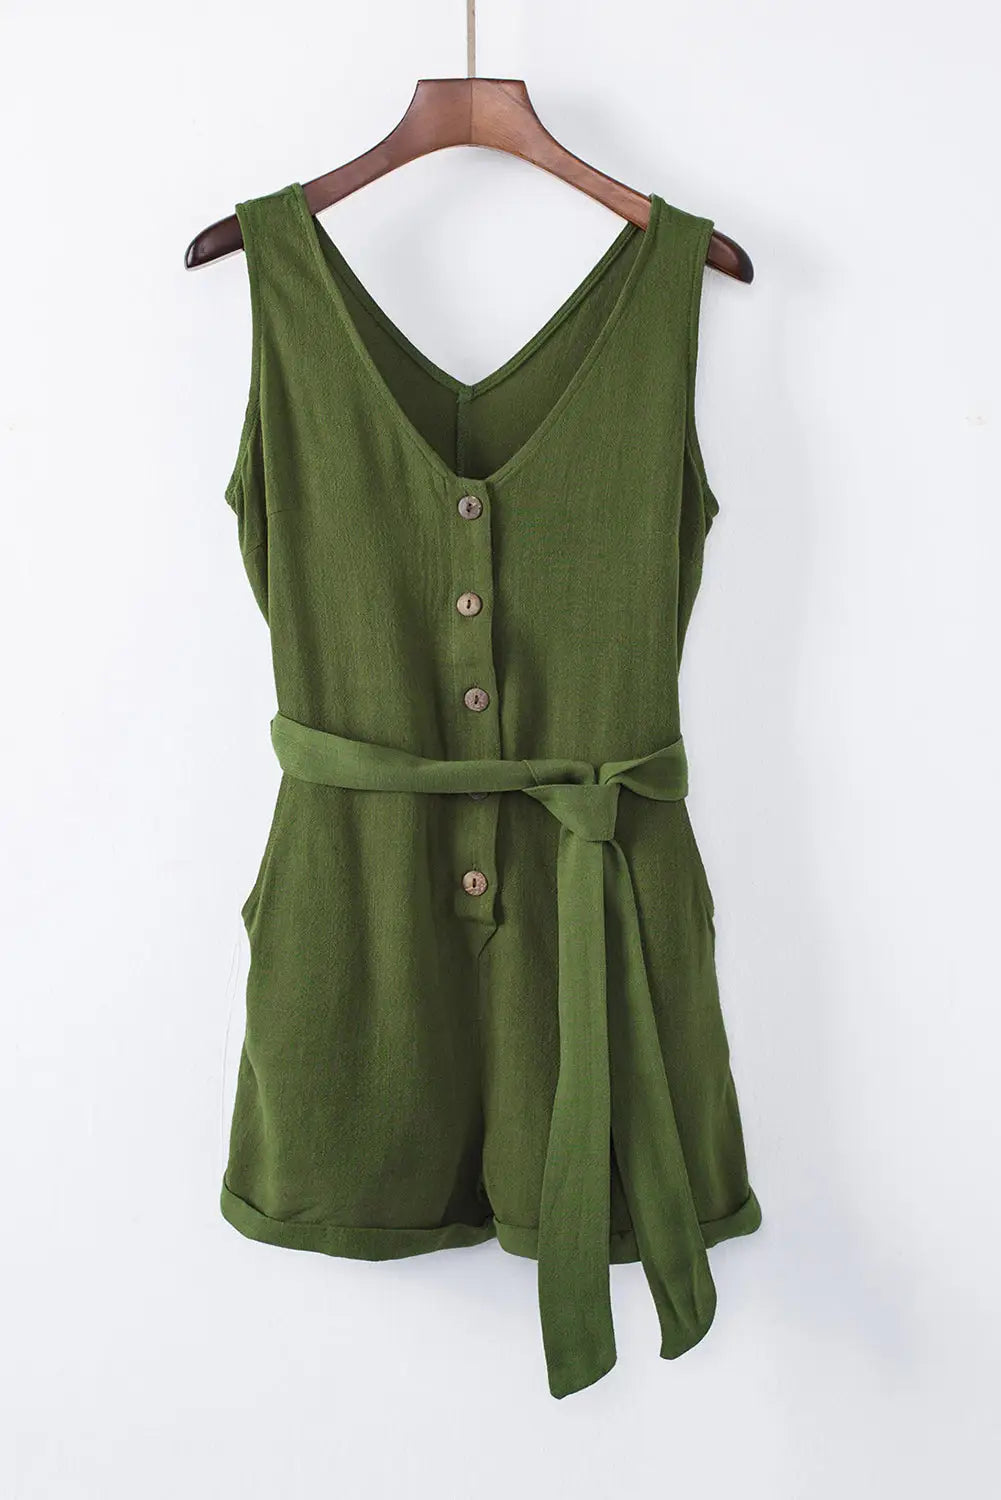 Green button v neck romper with belt - jumpsuits & rompers